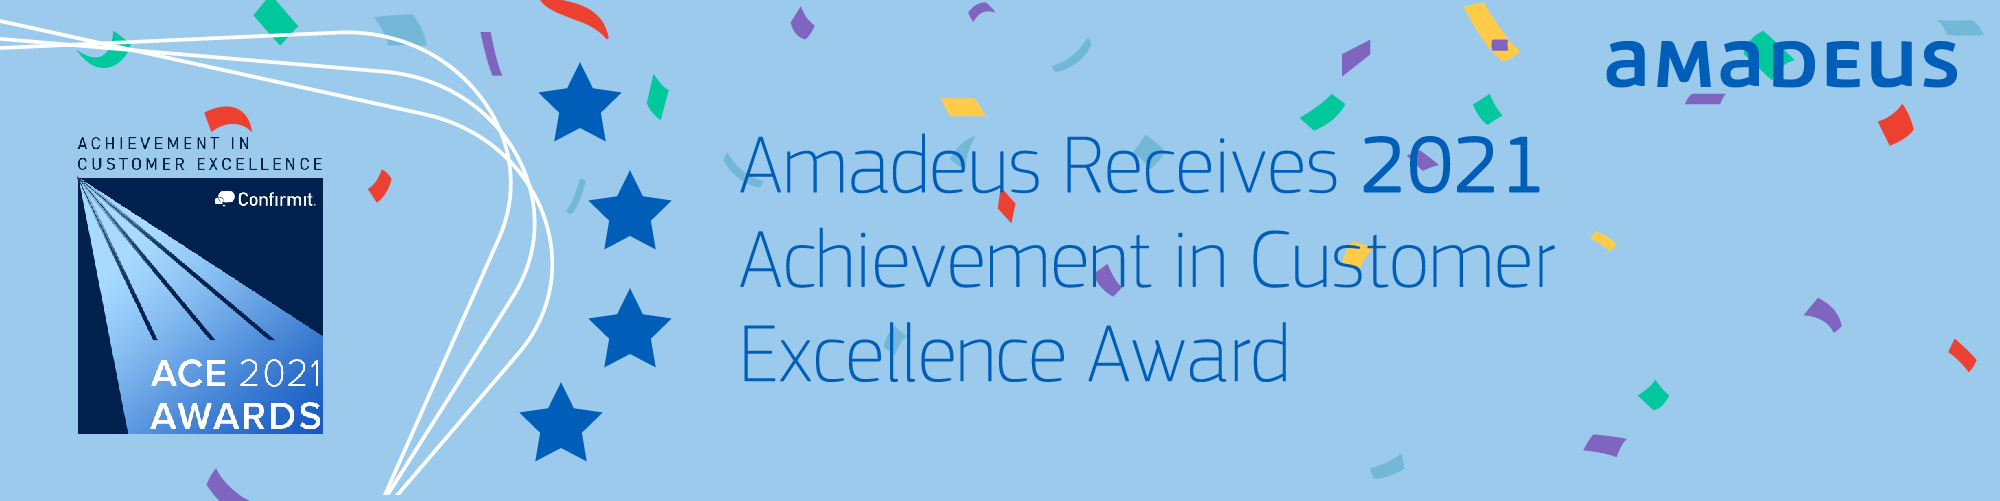 Amadeus Receives 2021 Achievement in Customer Excellence Award